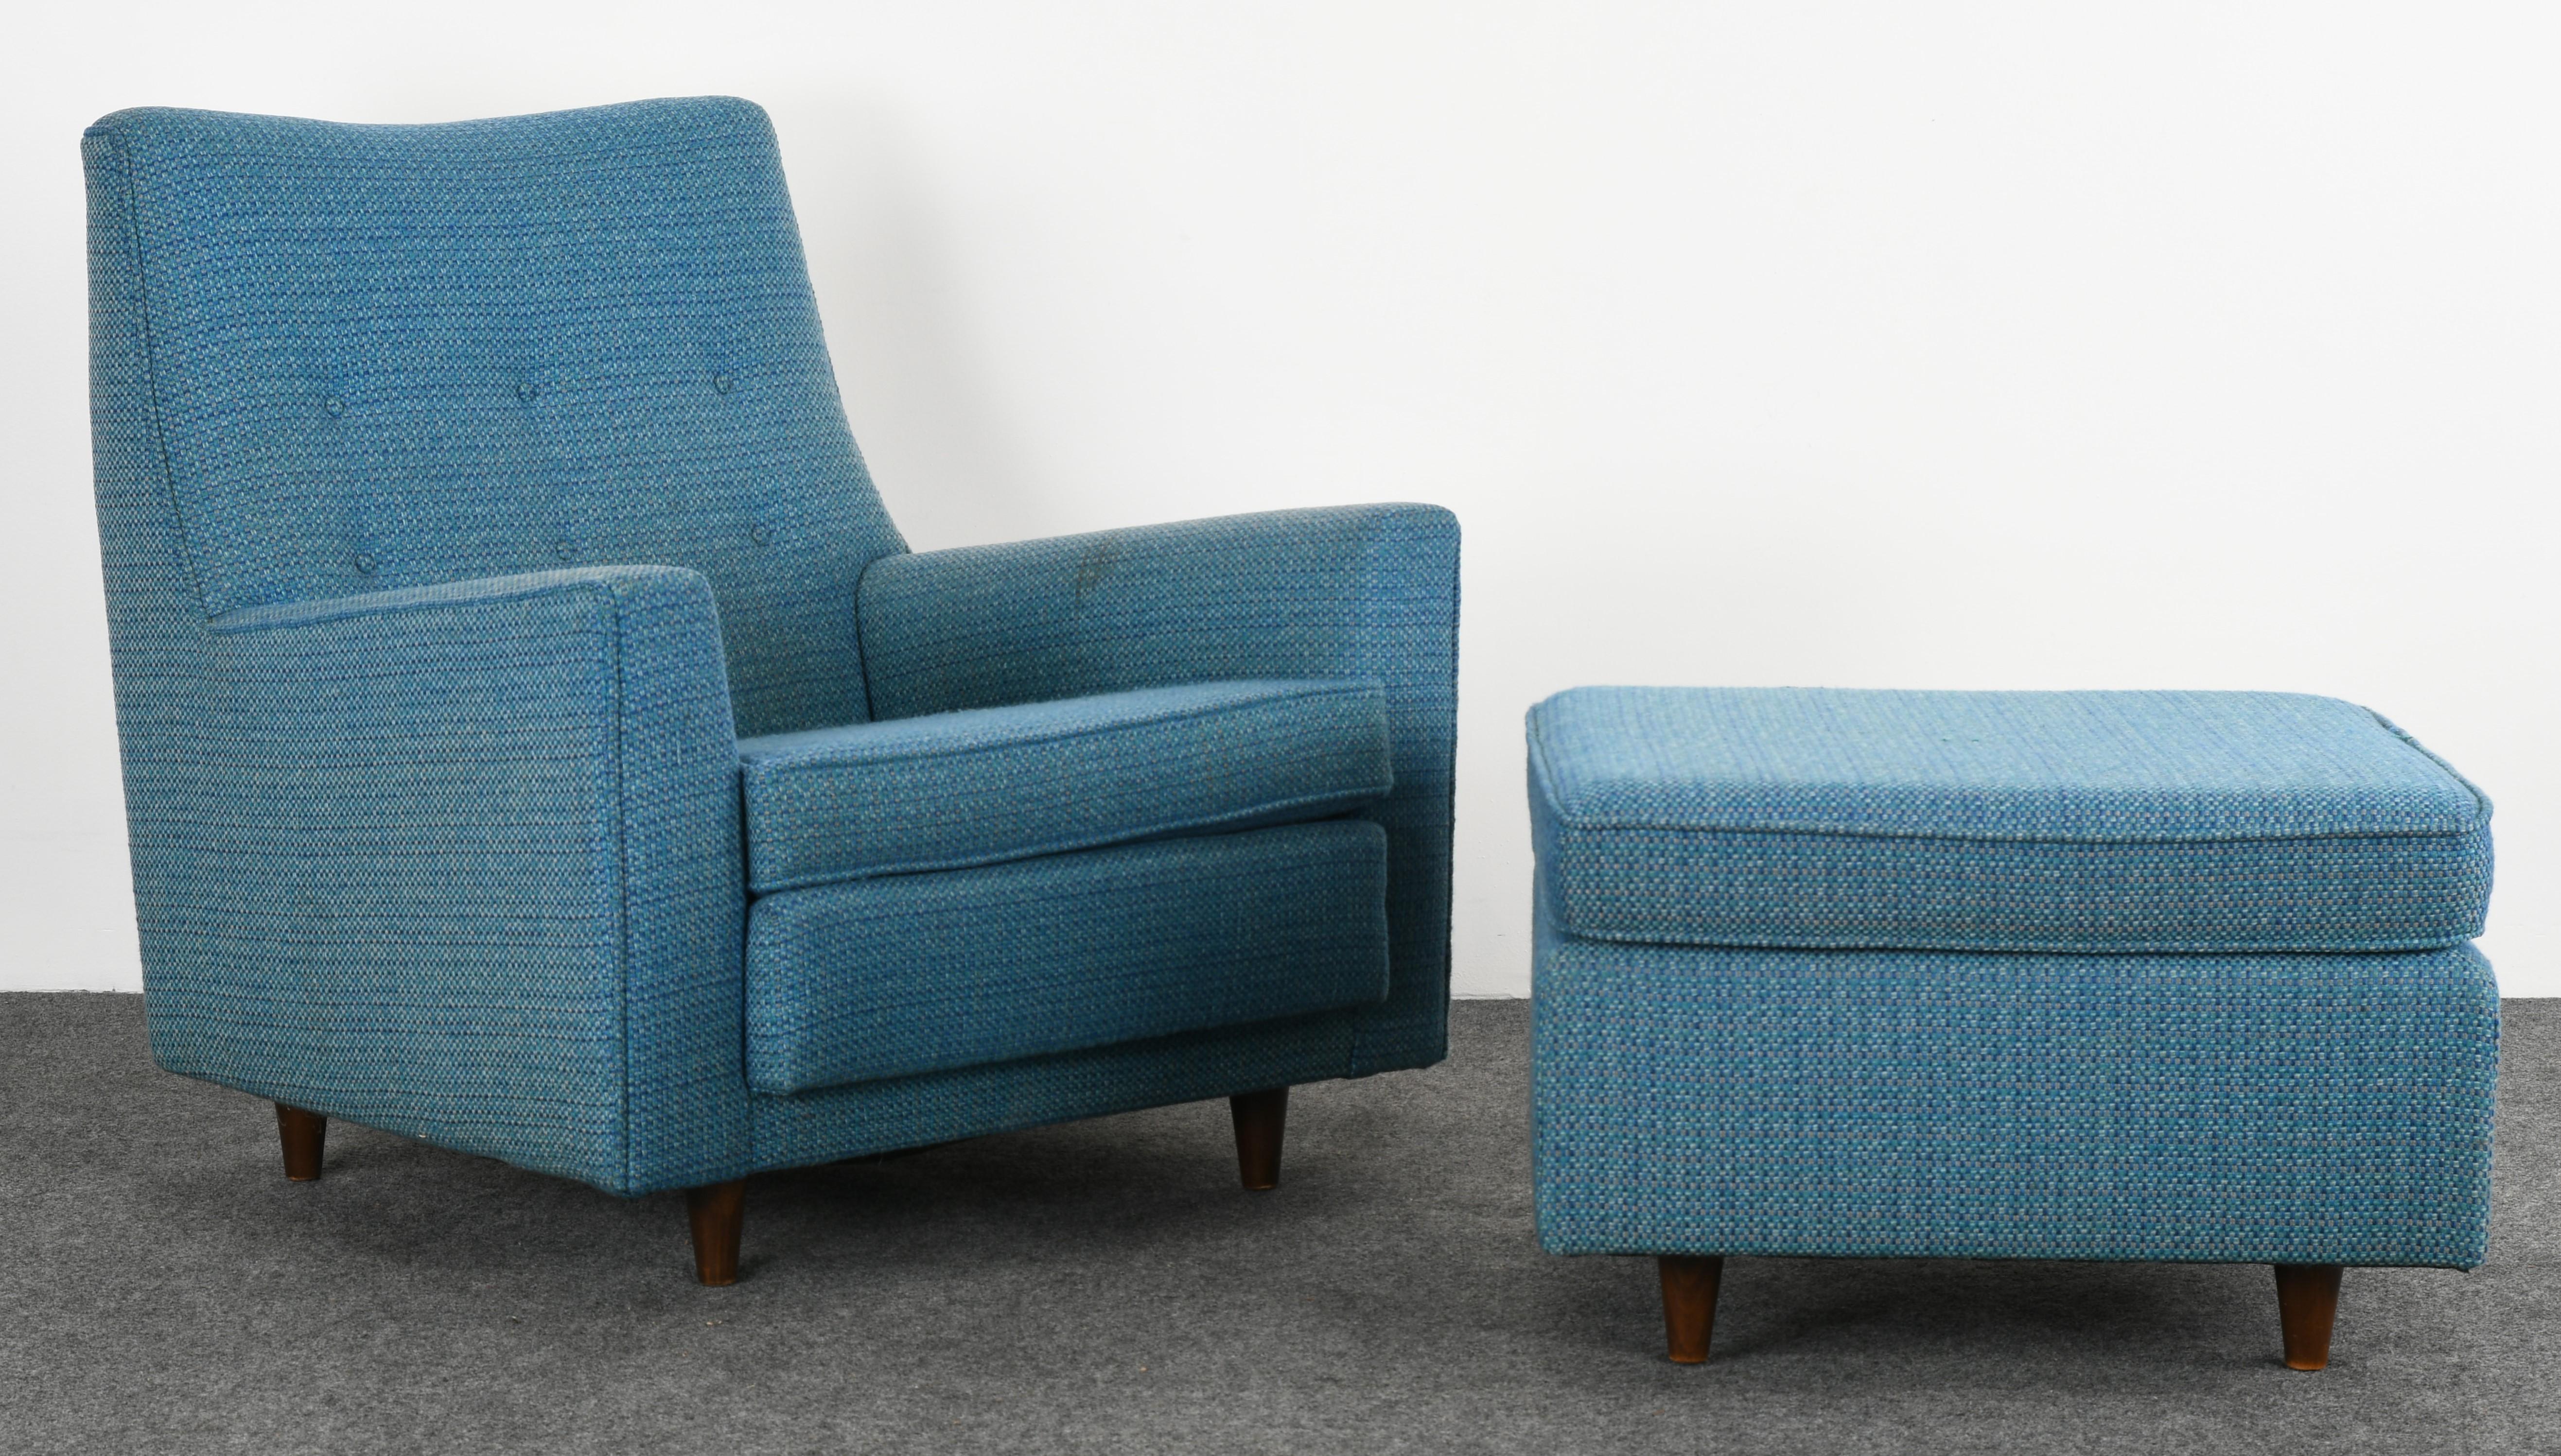 A Jens Risom lounge chair (Model Number U 333 Easy Chair) and matching ottoman (Model Number U 790). This chair and ottoman set are very comfortable. They are structurally sound with soft foam. Reupholstery is necessary. Special pricing down from